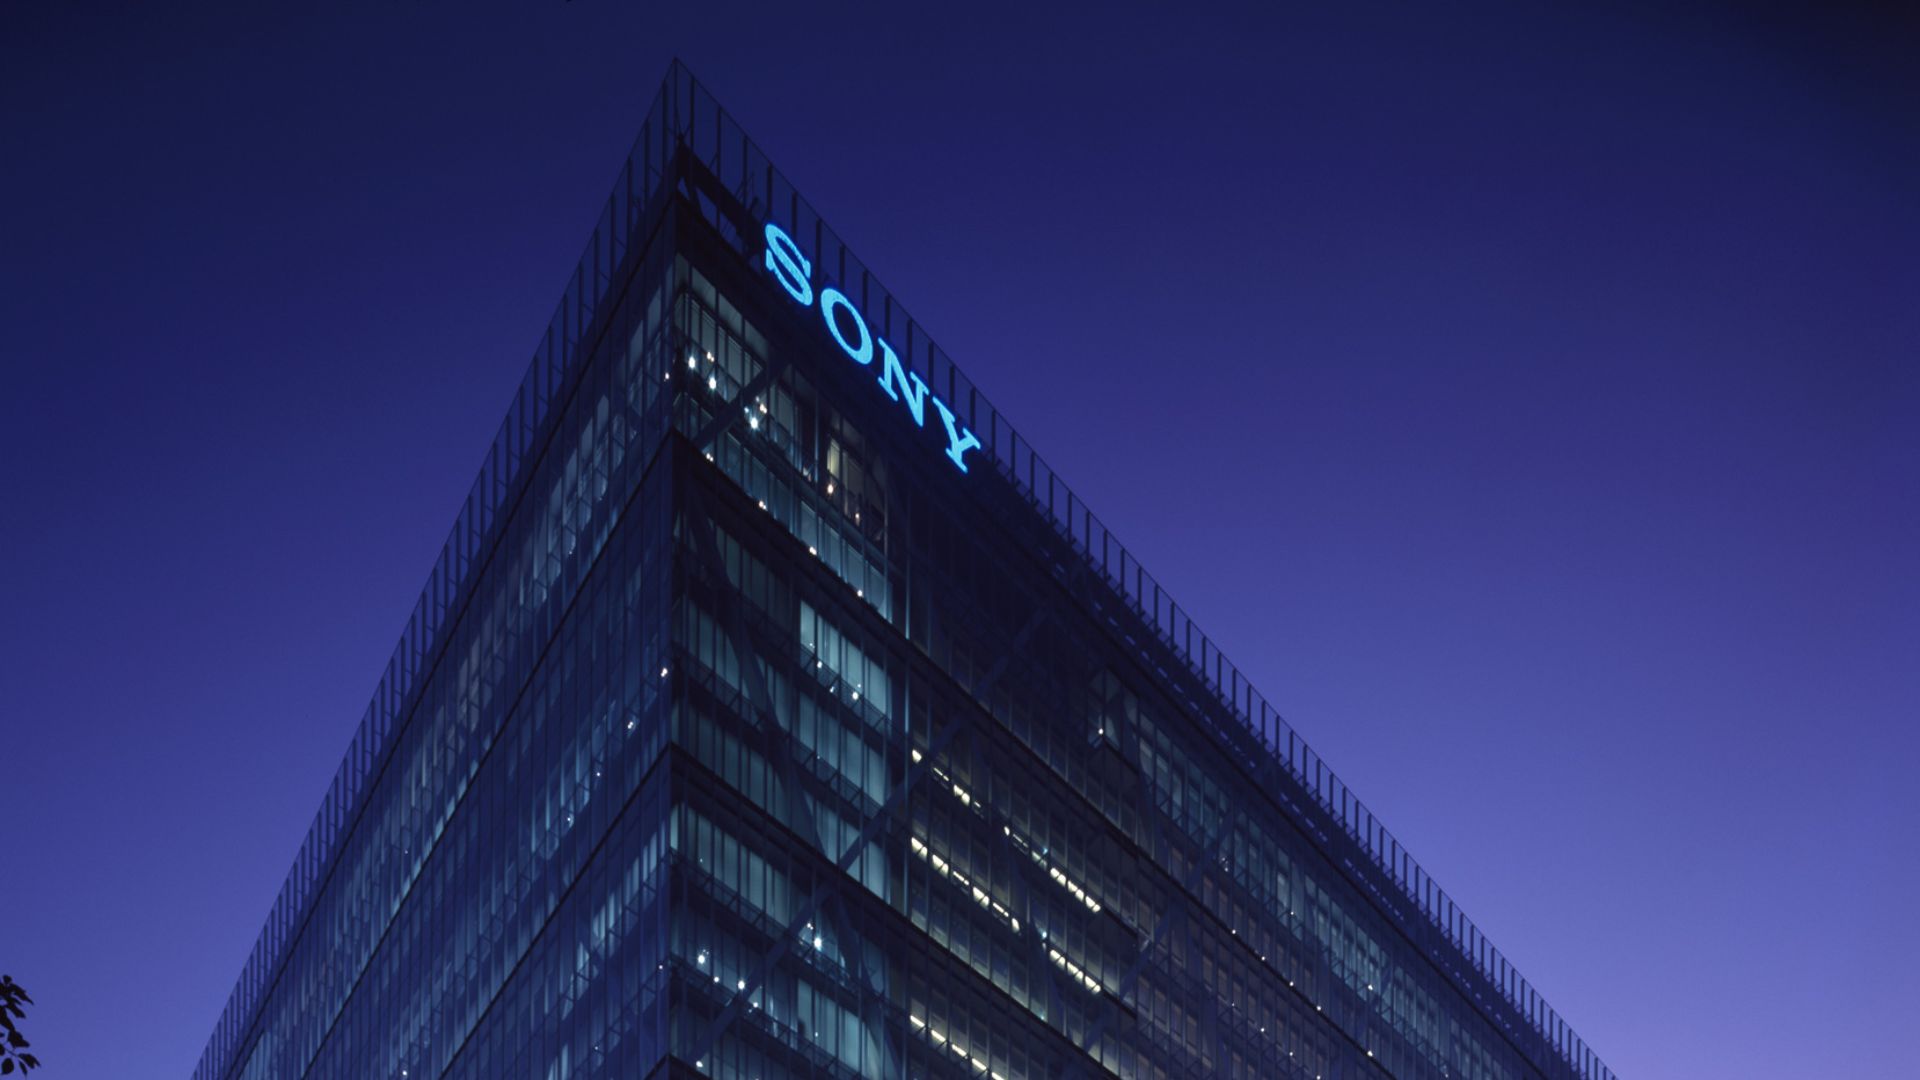 sony building at night